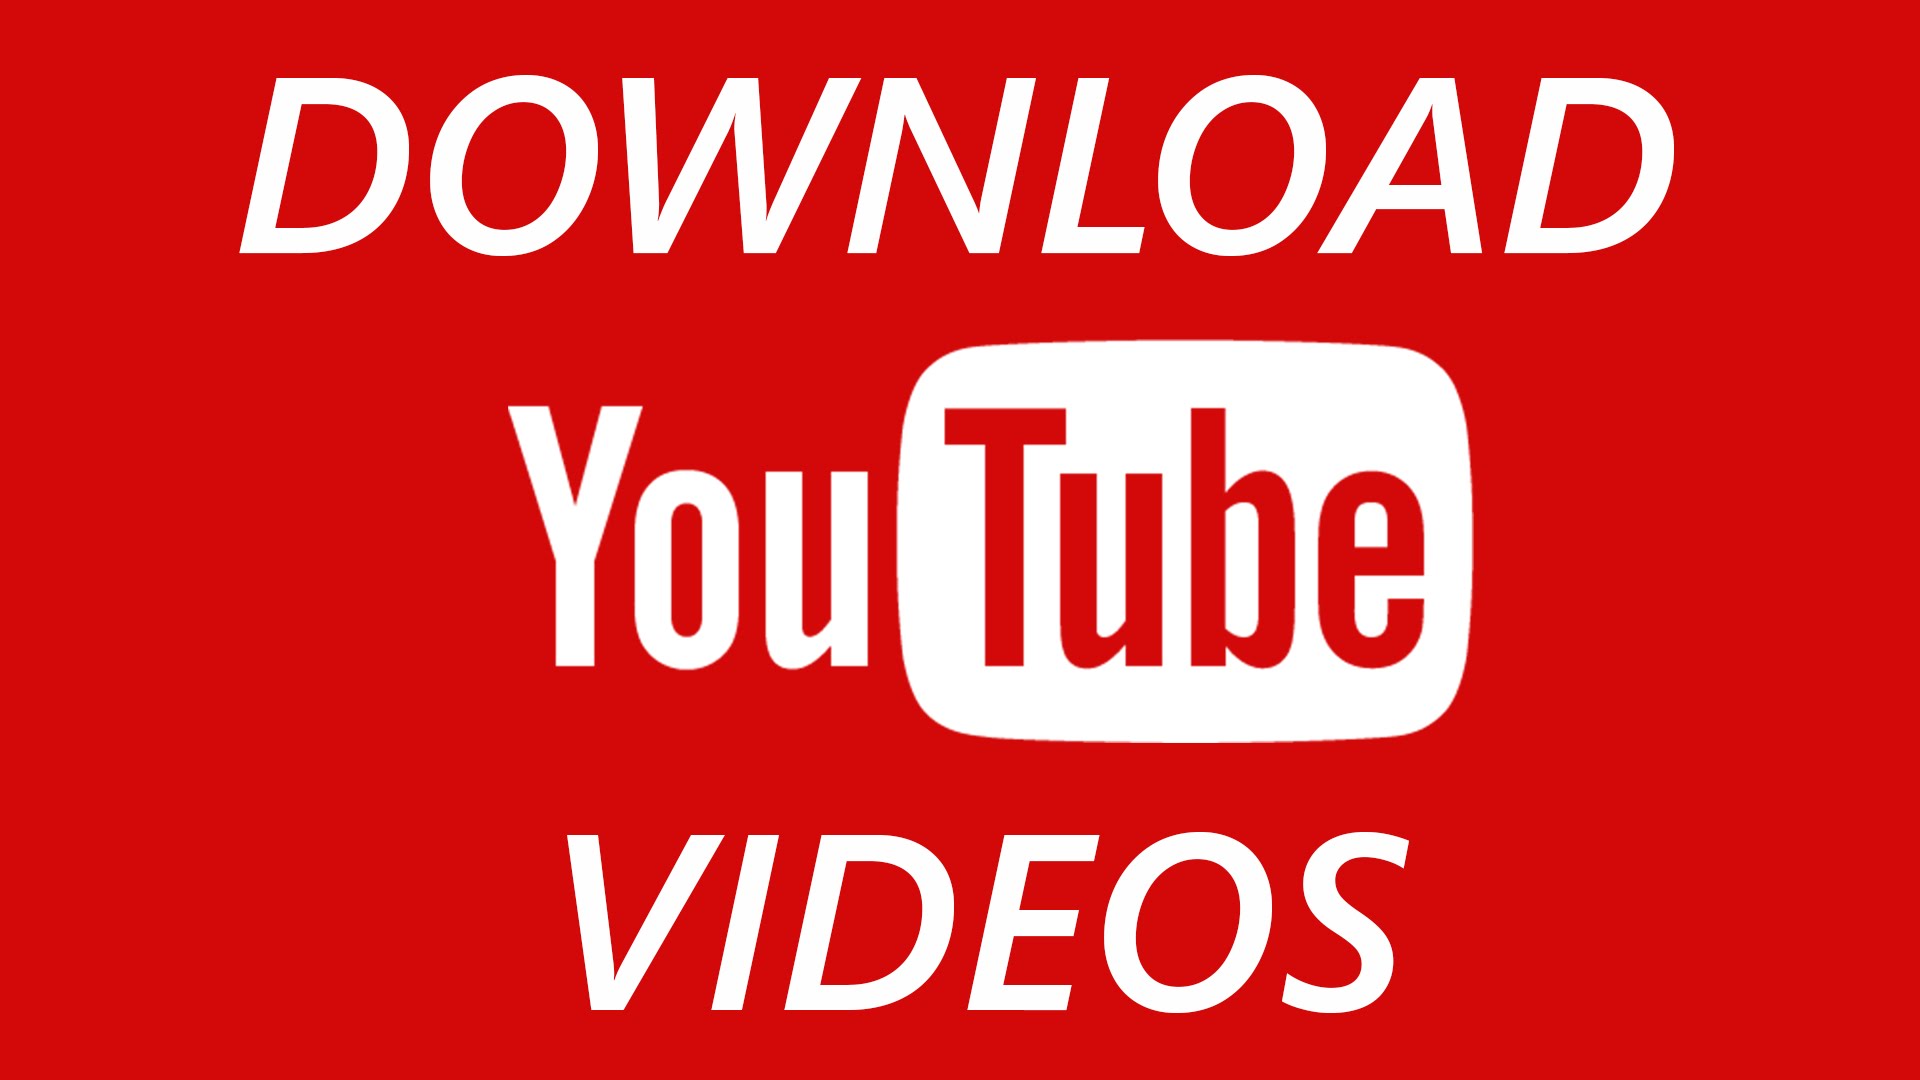 Free Android Apps for Downloading YouTube Videos